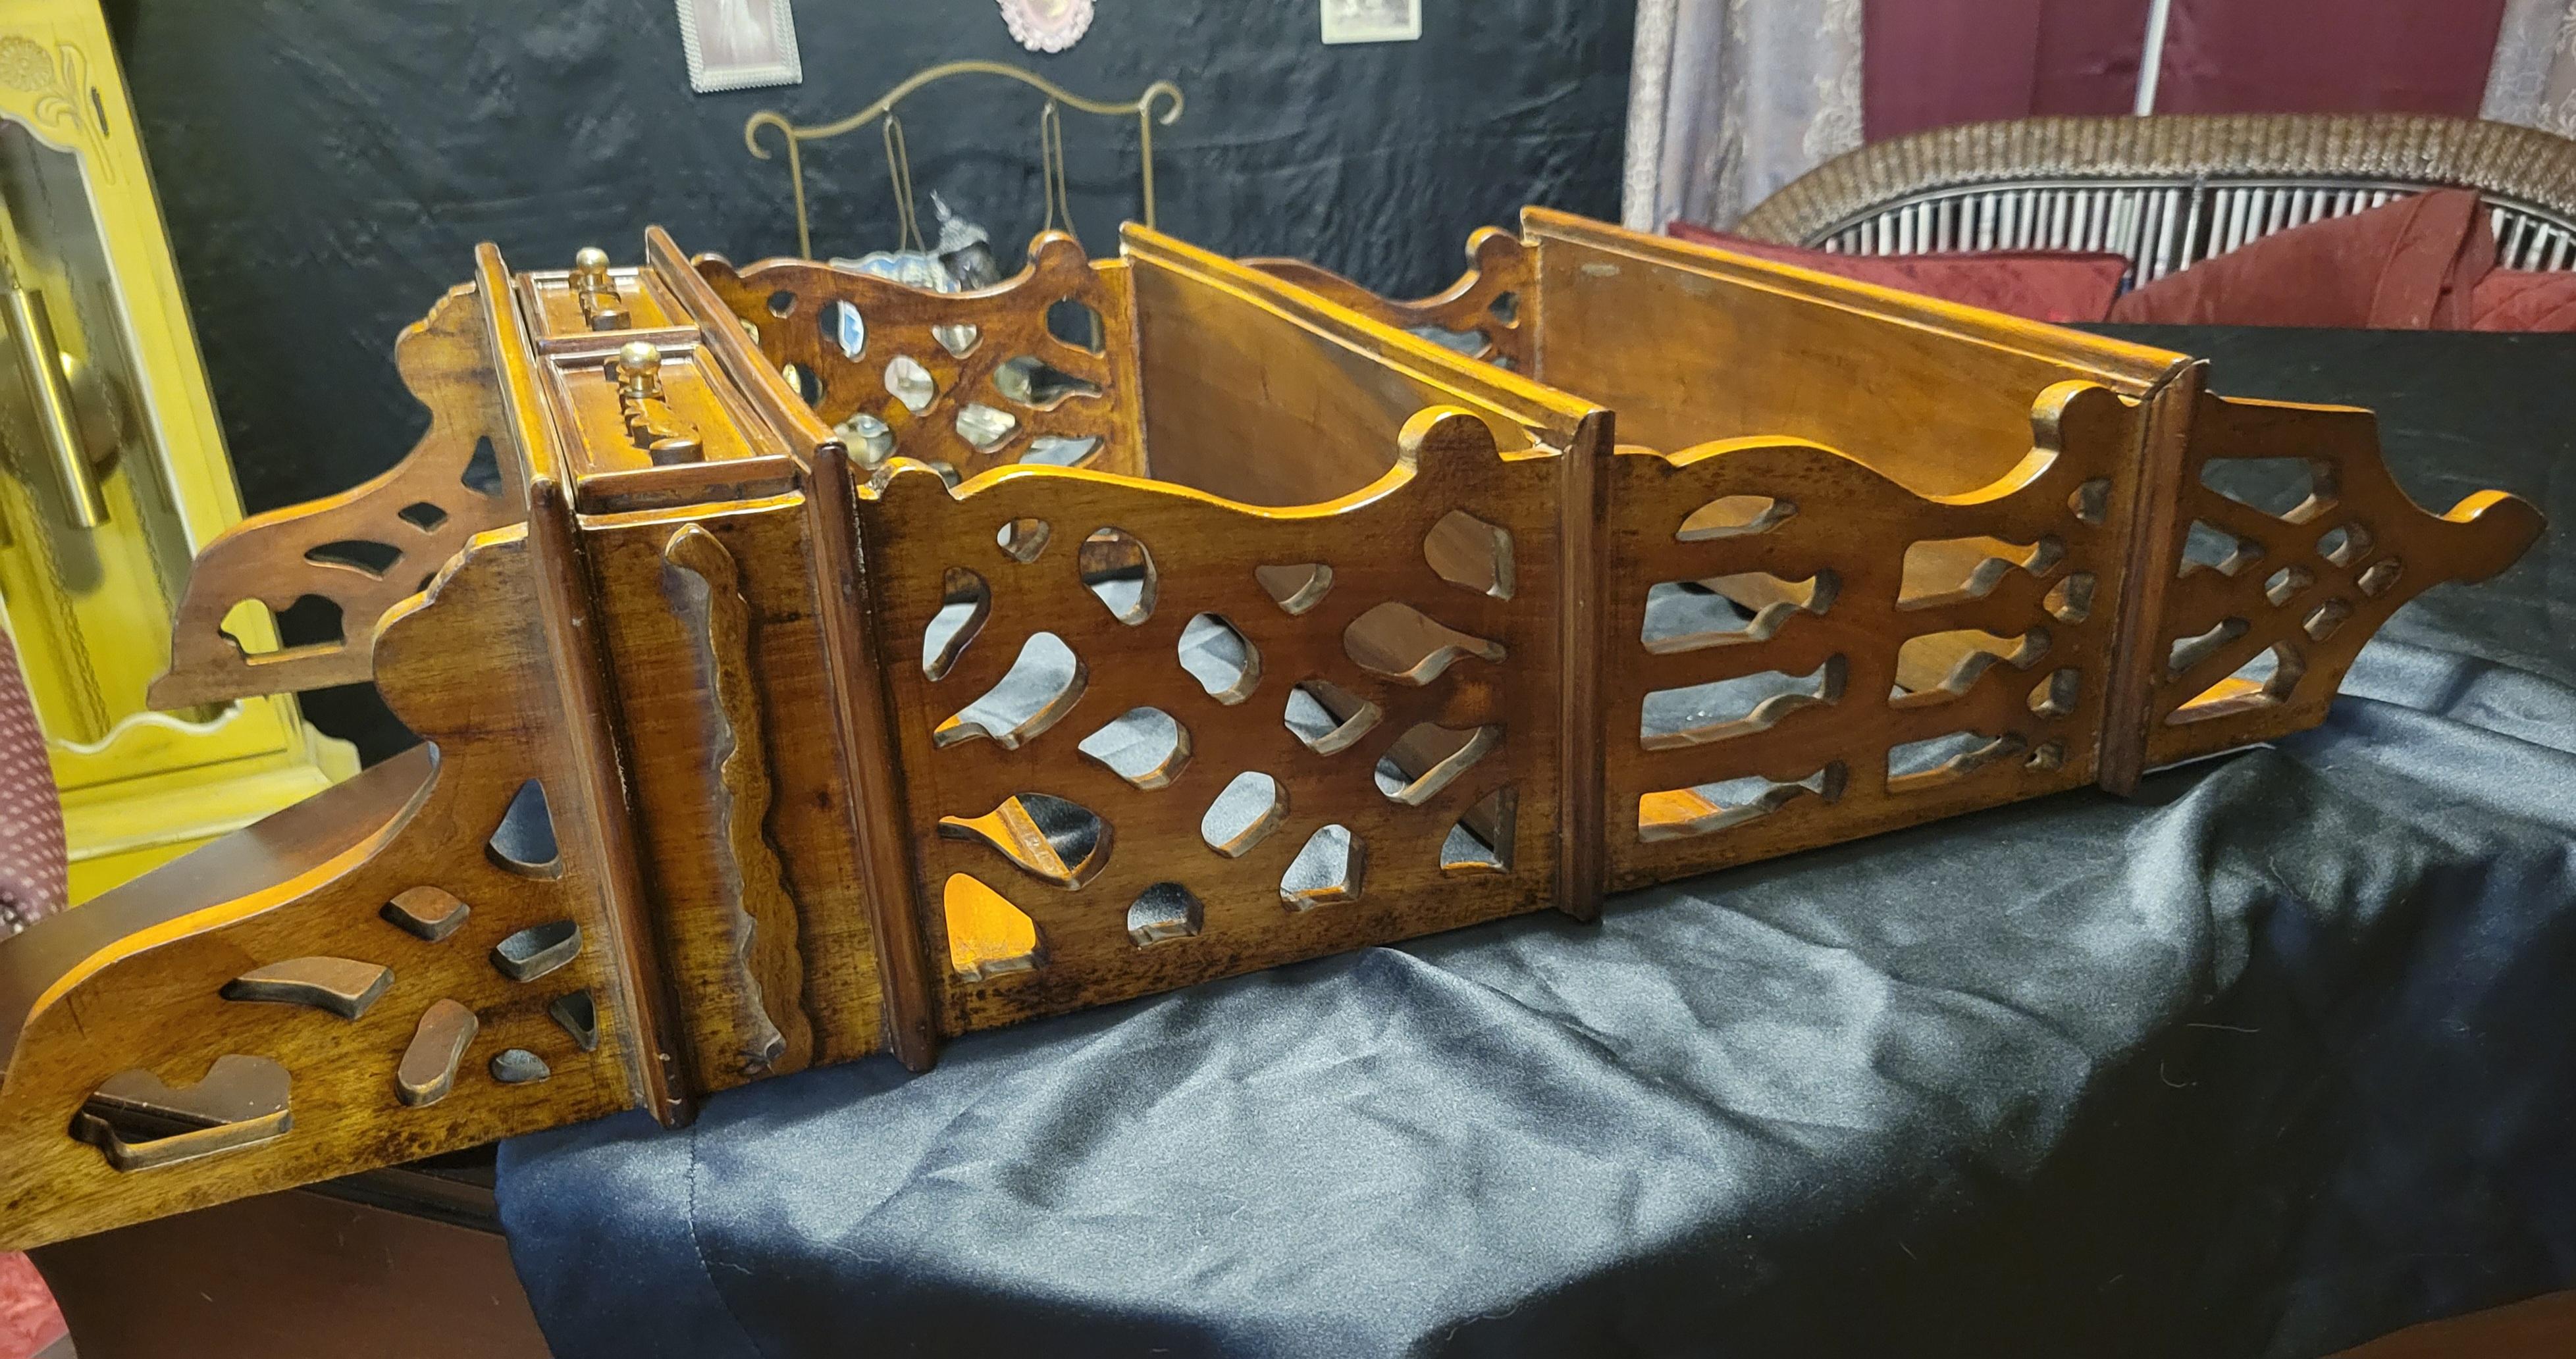 Antique French Provincial Hand-Carved Mahogany Kitchen Shelf with Two Drawers  In Good Condition For Sale In Phoenix, AZ